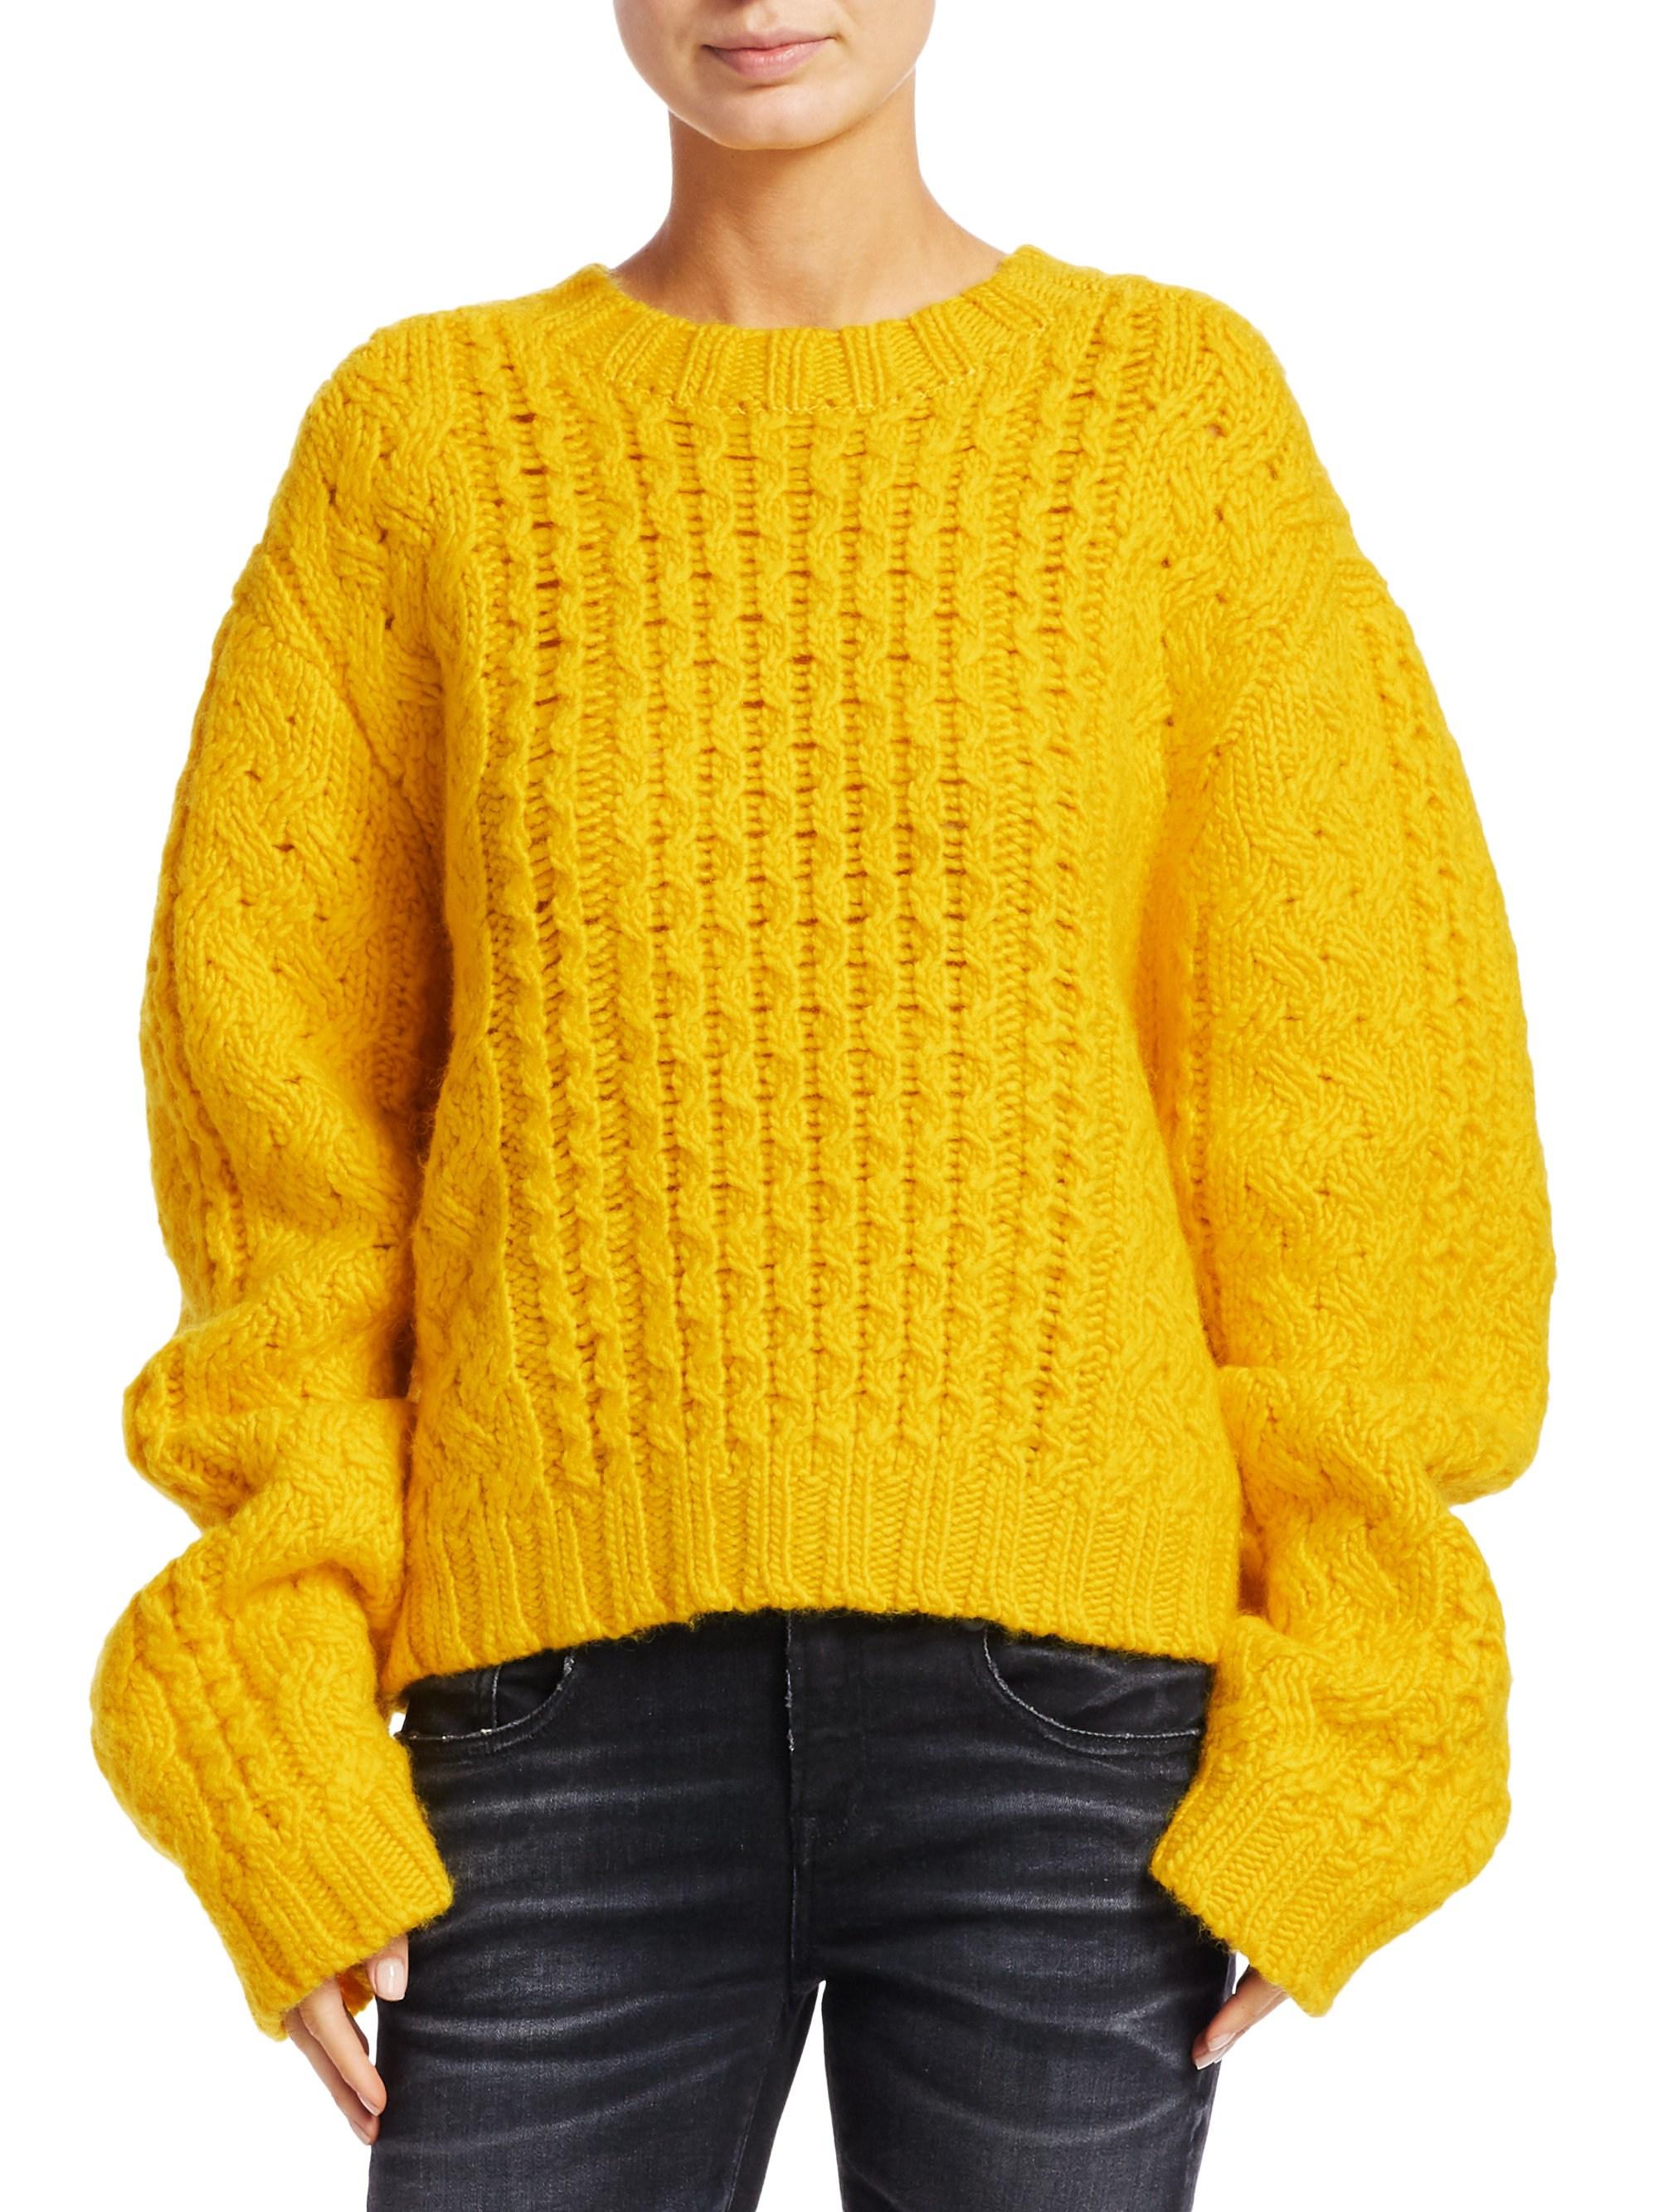 R13 Aran Cropped Wool Cable Knit Sweater in Yellow - Lyst